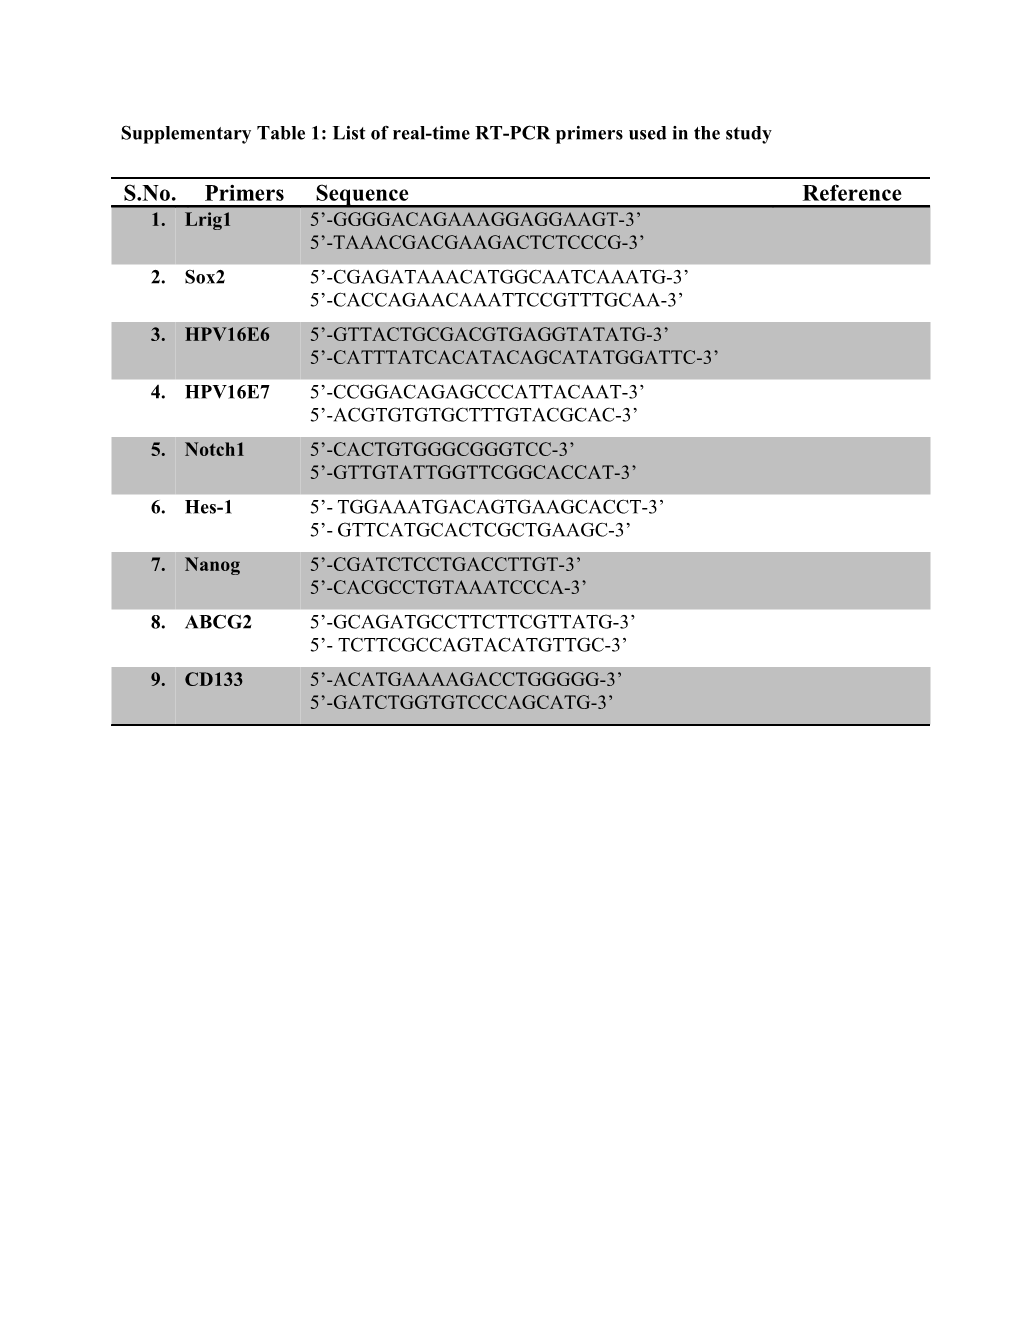 Supplementary Table 1: List of Real-Time RT-PCR Primers Used in the Study